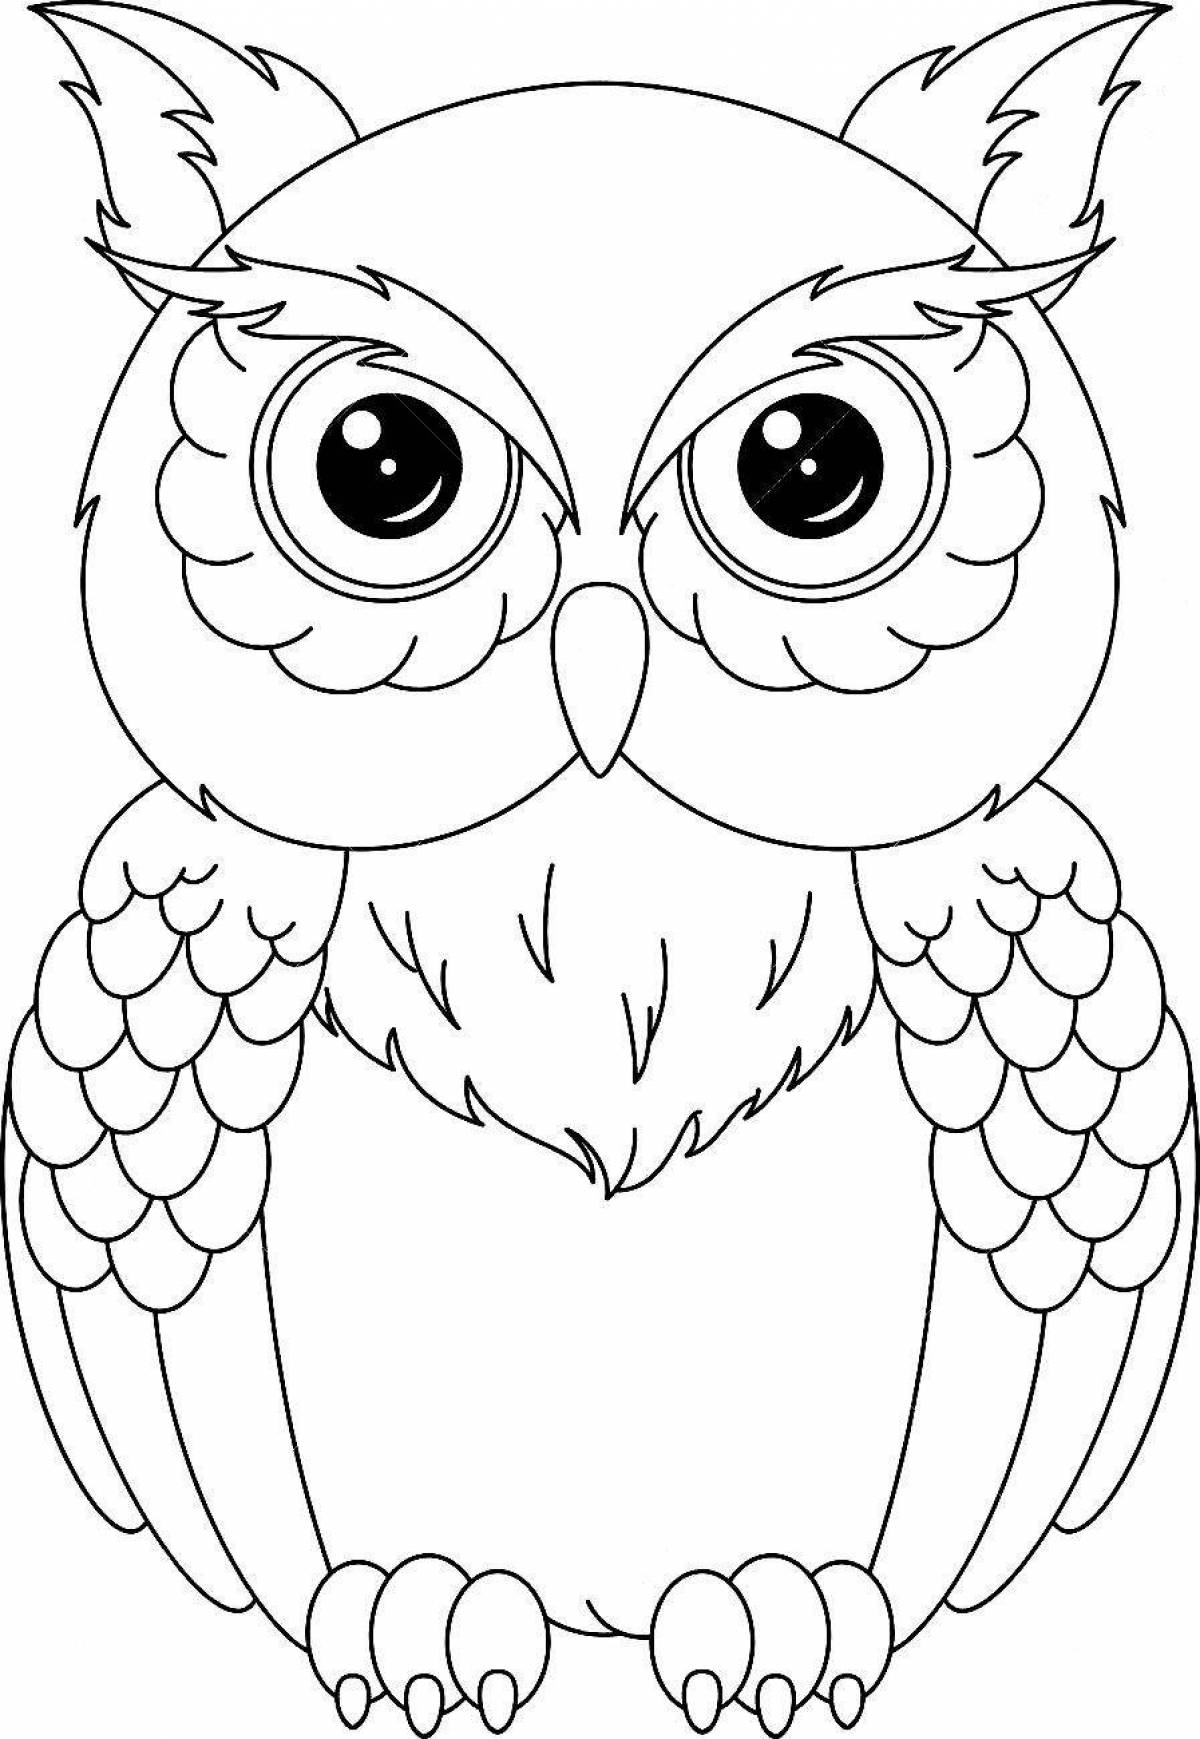 Owl for children 3 4 years old #3